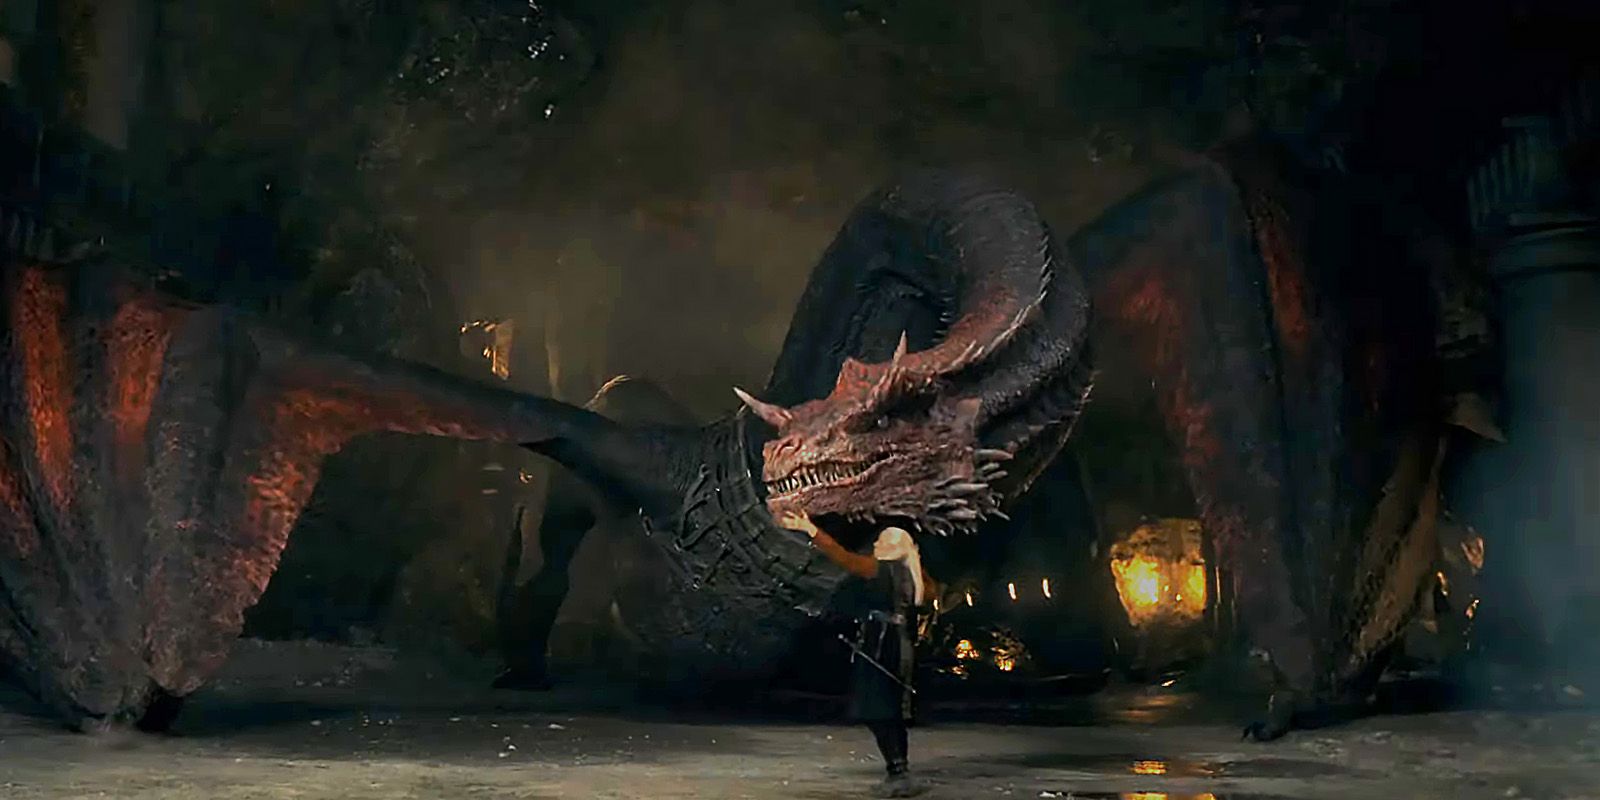 House of the Dragon - House Of The Dragon: Official Teaser